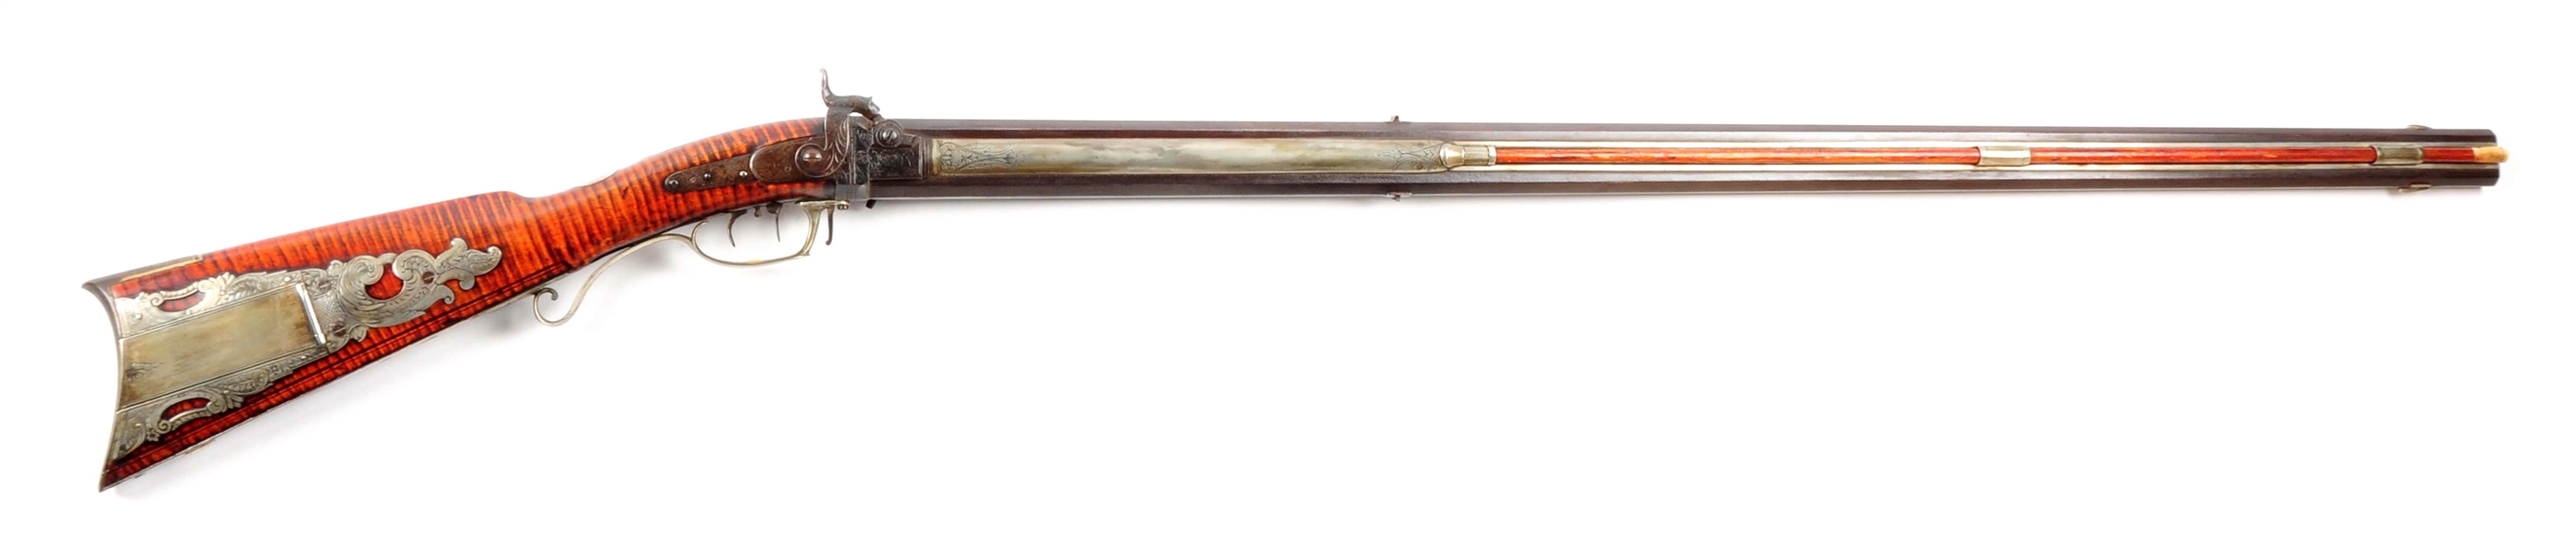 (A) SILVER MOUNTED PERCUSSION OVER/UNDER SWIVEL BREECH RIFLE BY GIBBS.